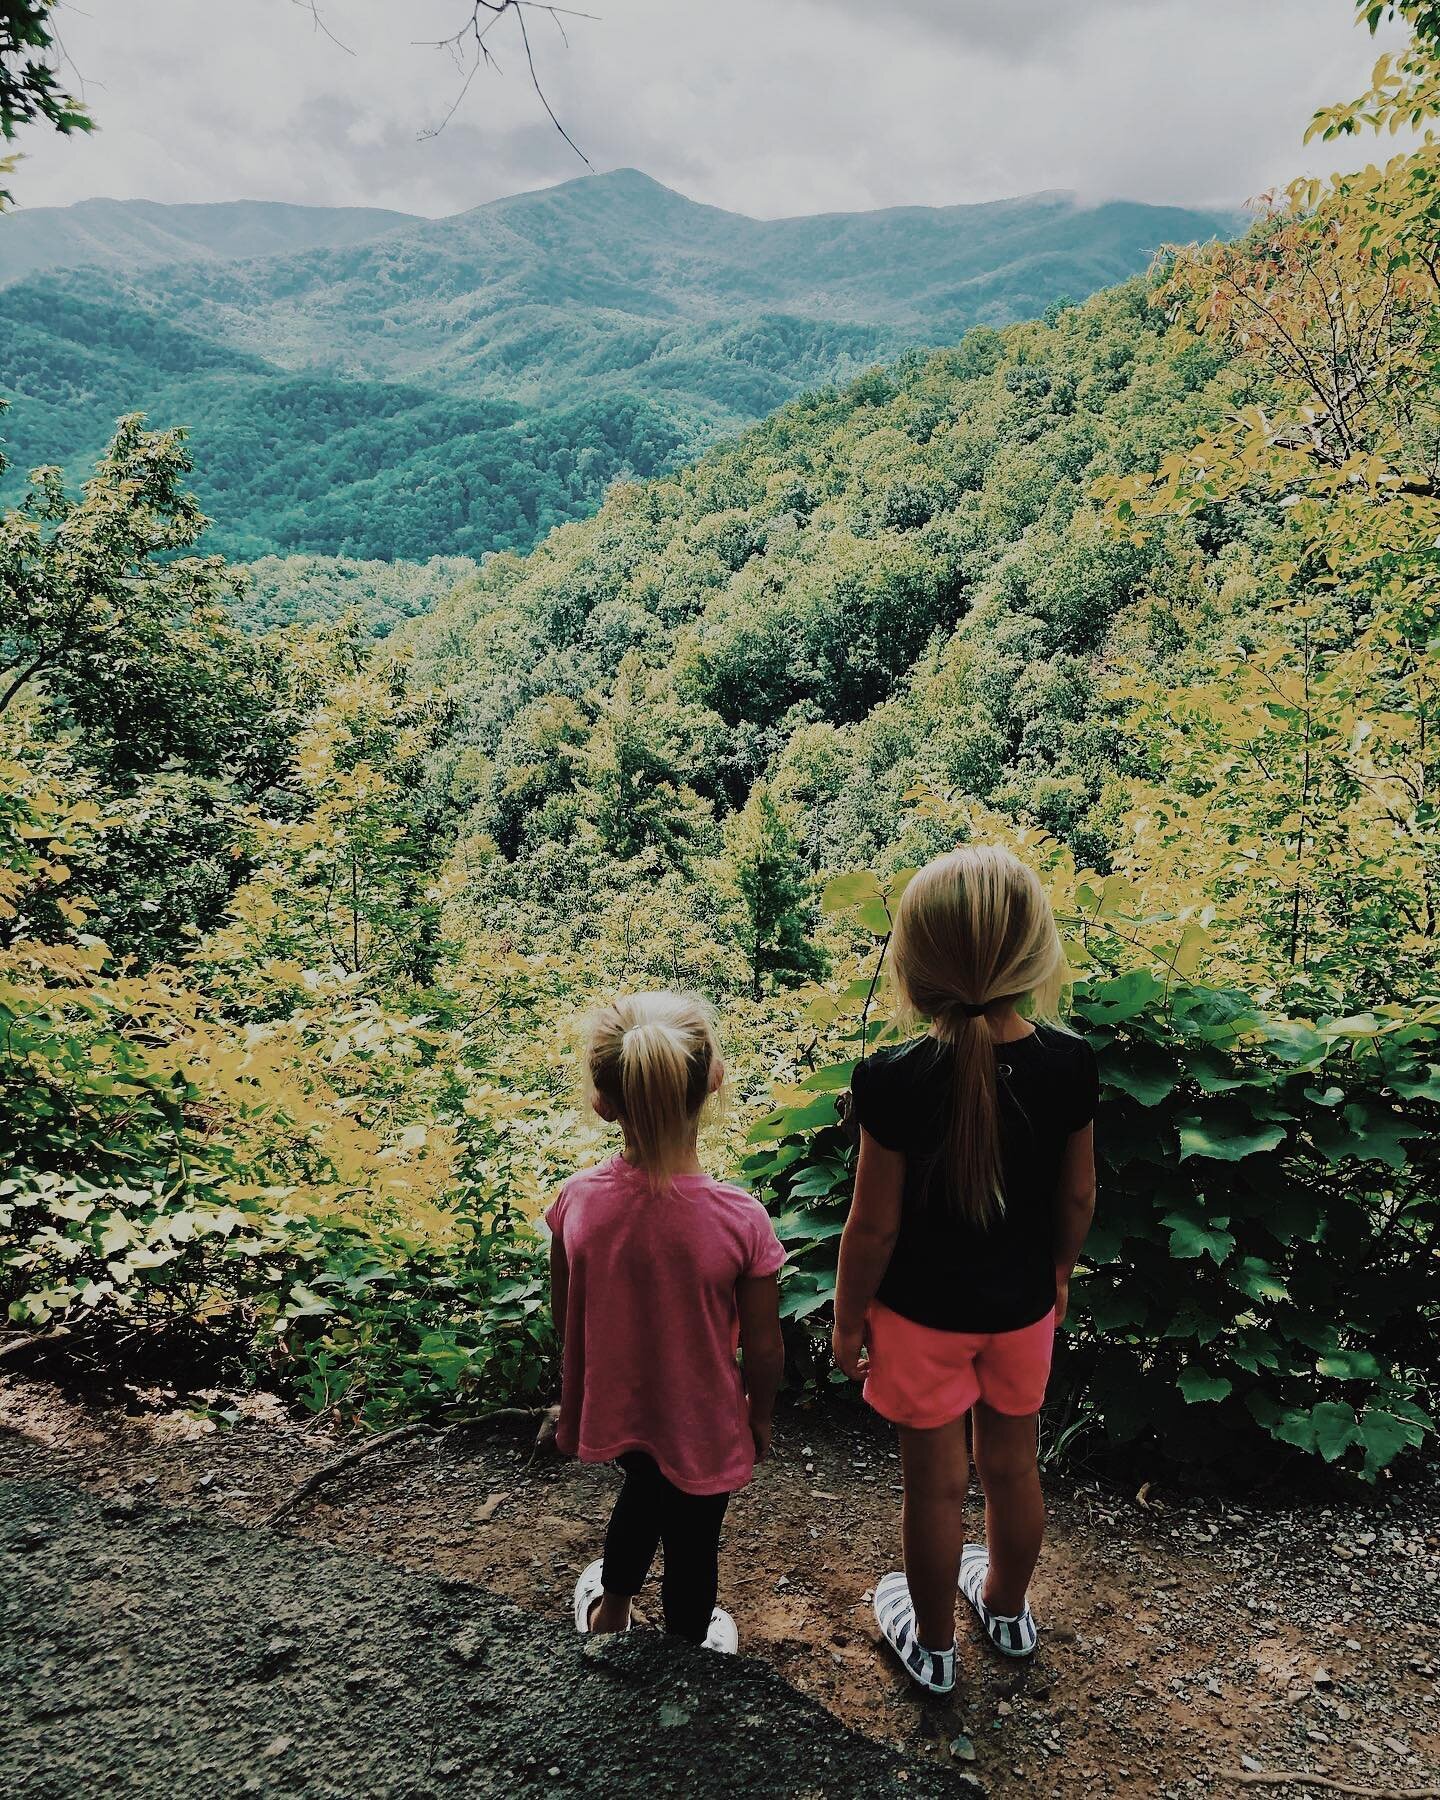 No matter your age, we&rsquo;re all creatives. Whether it&rsquo;s painting or connecting to nature, share your Creator Story via link in bio!

📸 @woogle_life&rsquo;s kiddos with the best views, steps away from a destination home in the Smoky Mountai